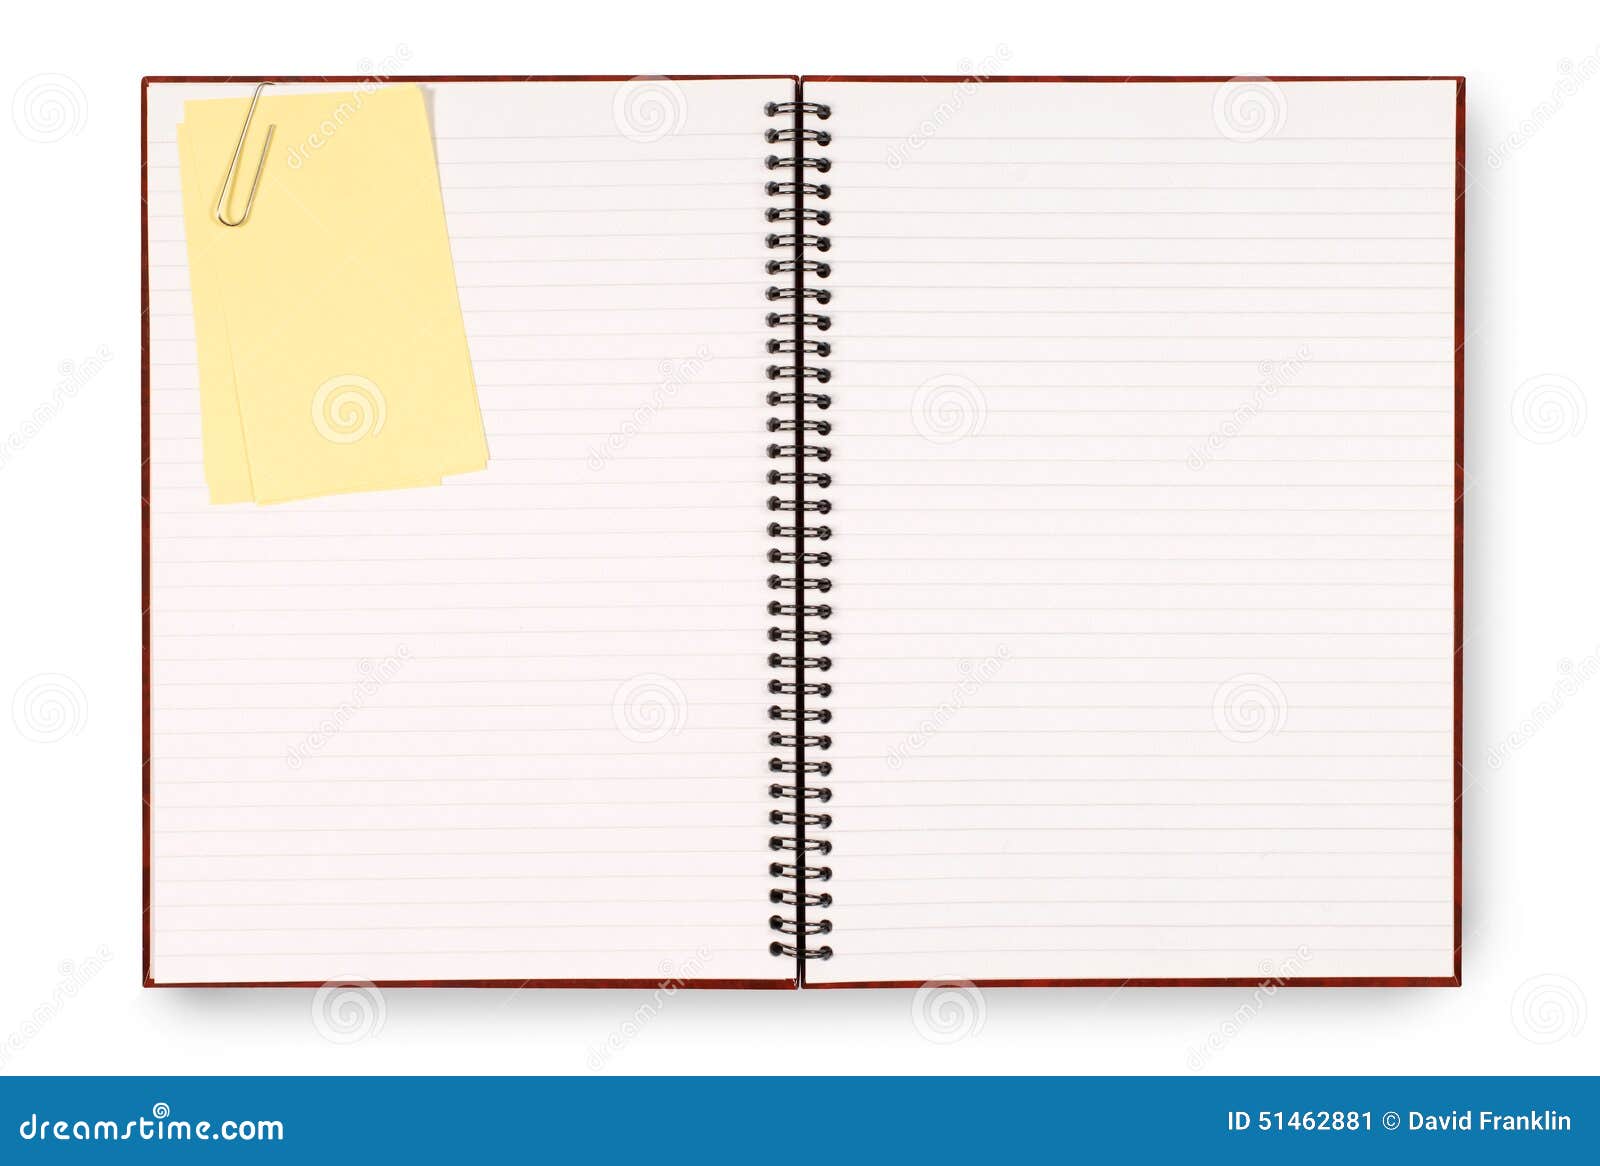 Blank Writing Book Spiral Notepad Yellow Post It Style Sticky Note Isolated On White Background Stock Image Image Of Untidy Space